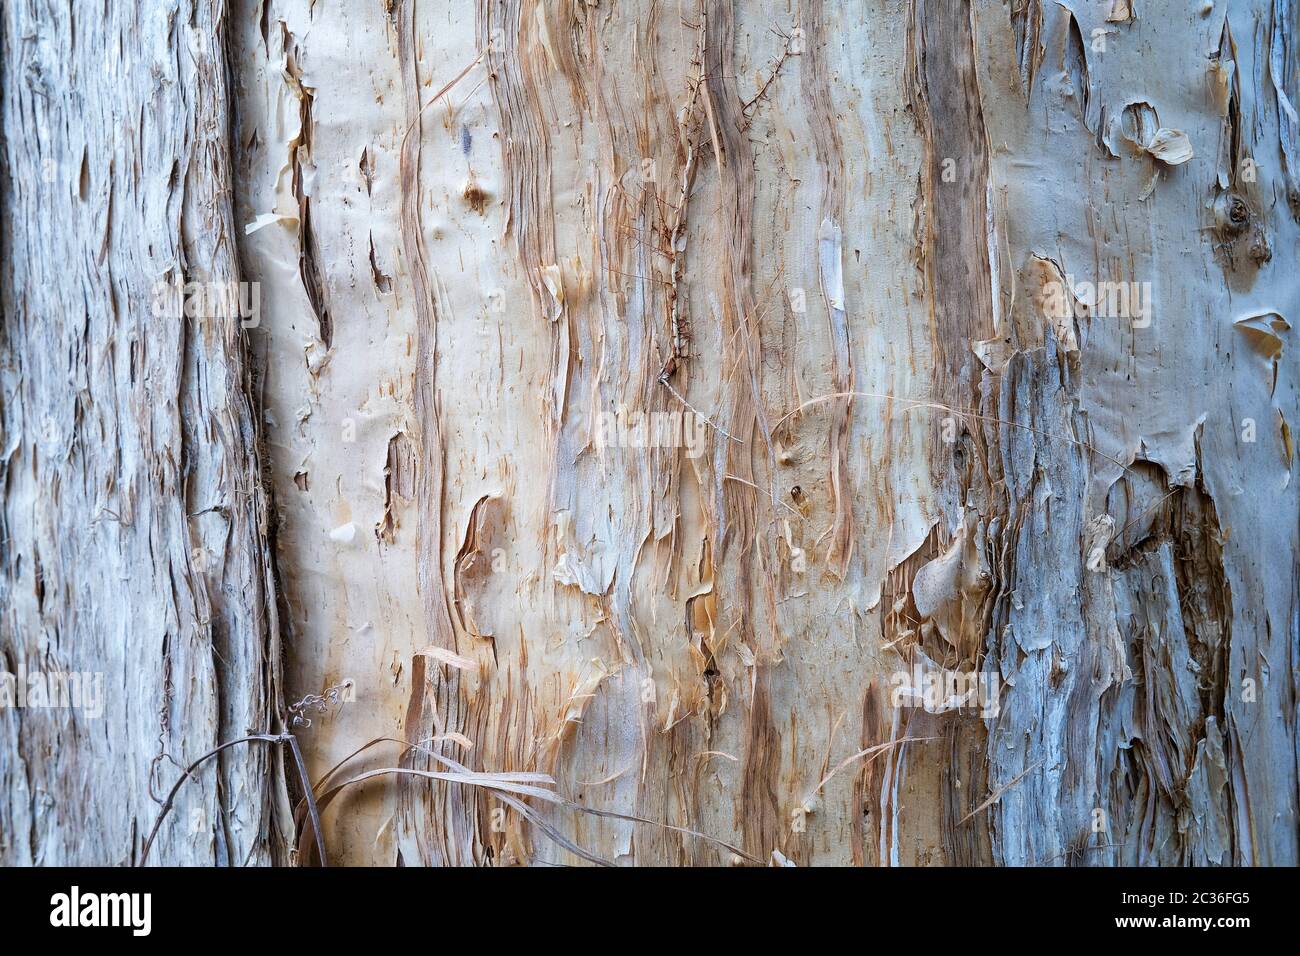 Close-up of the bark of the Melaleuca tree also known as Paperbark Tree, near Darwin in the Northern Territory of Australia Stock Photo